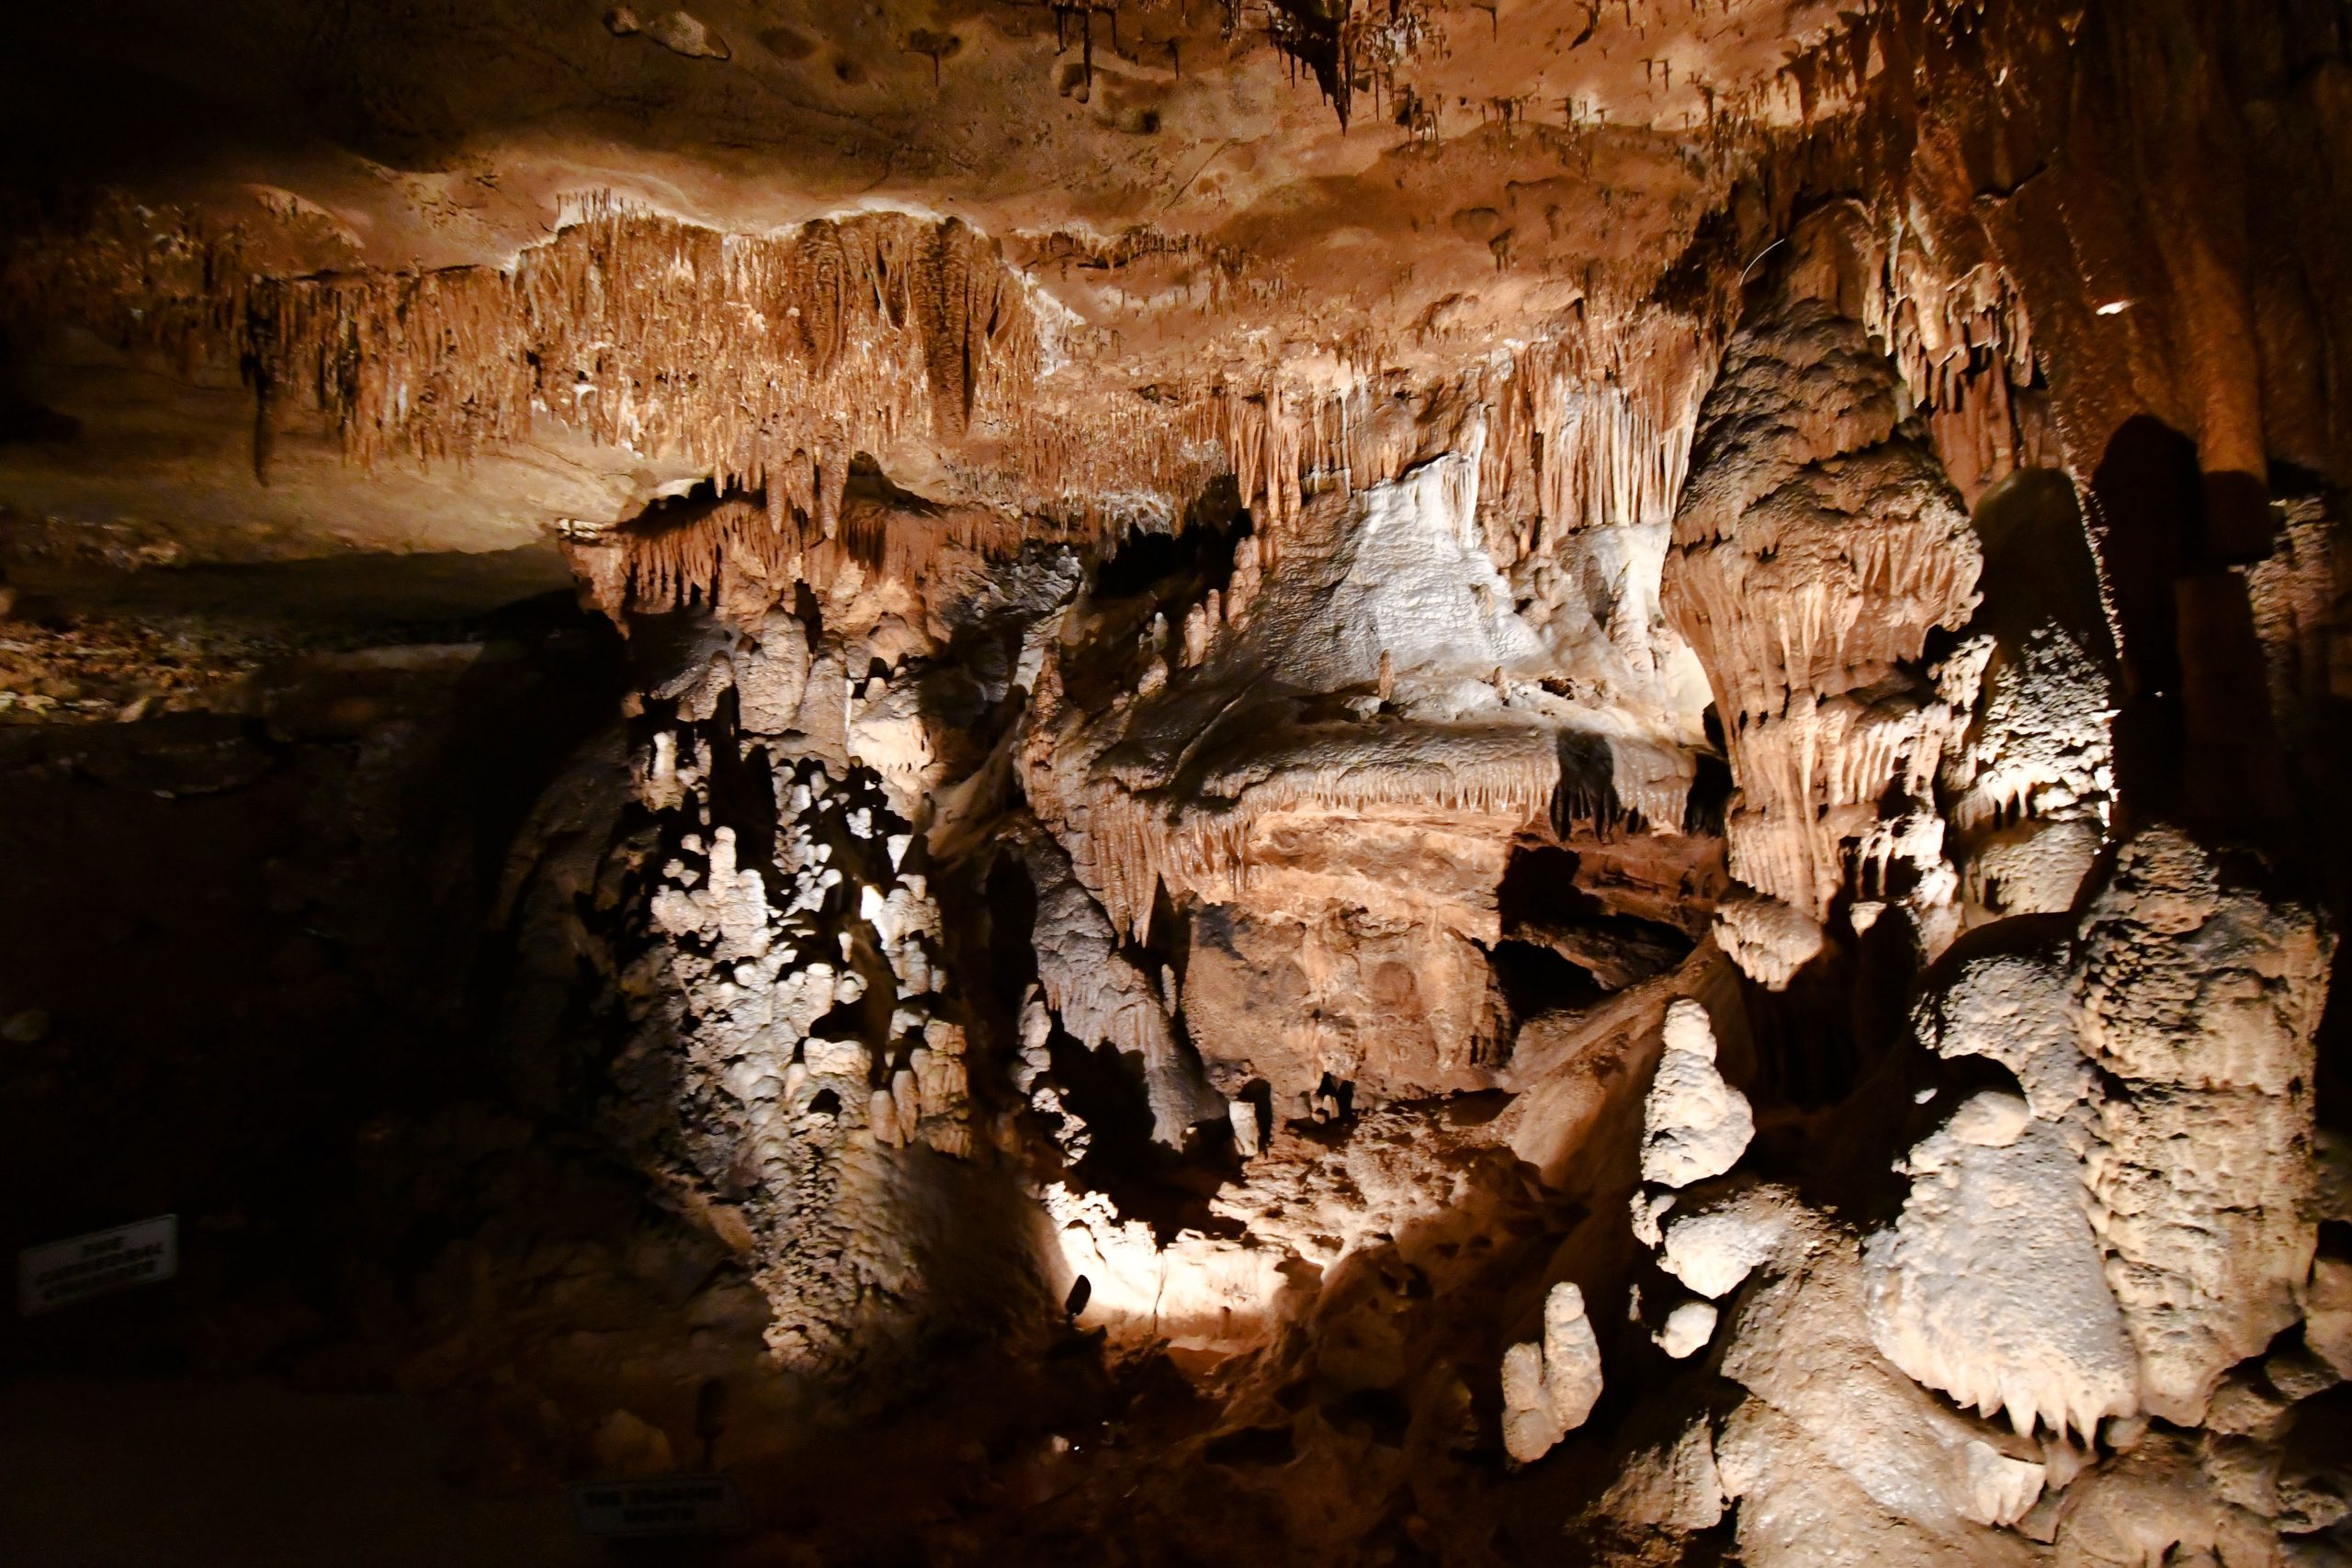 Springfield historic attraction, Crystal Cave, reopens to the public